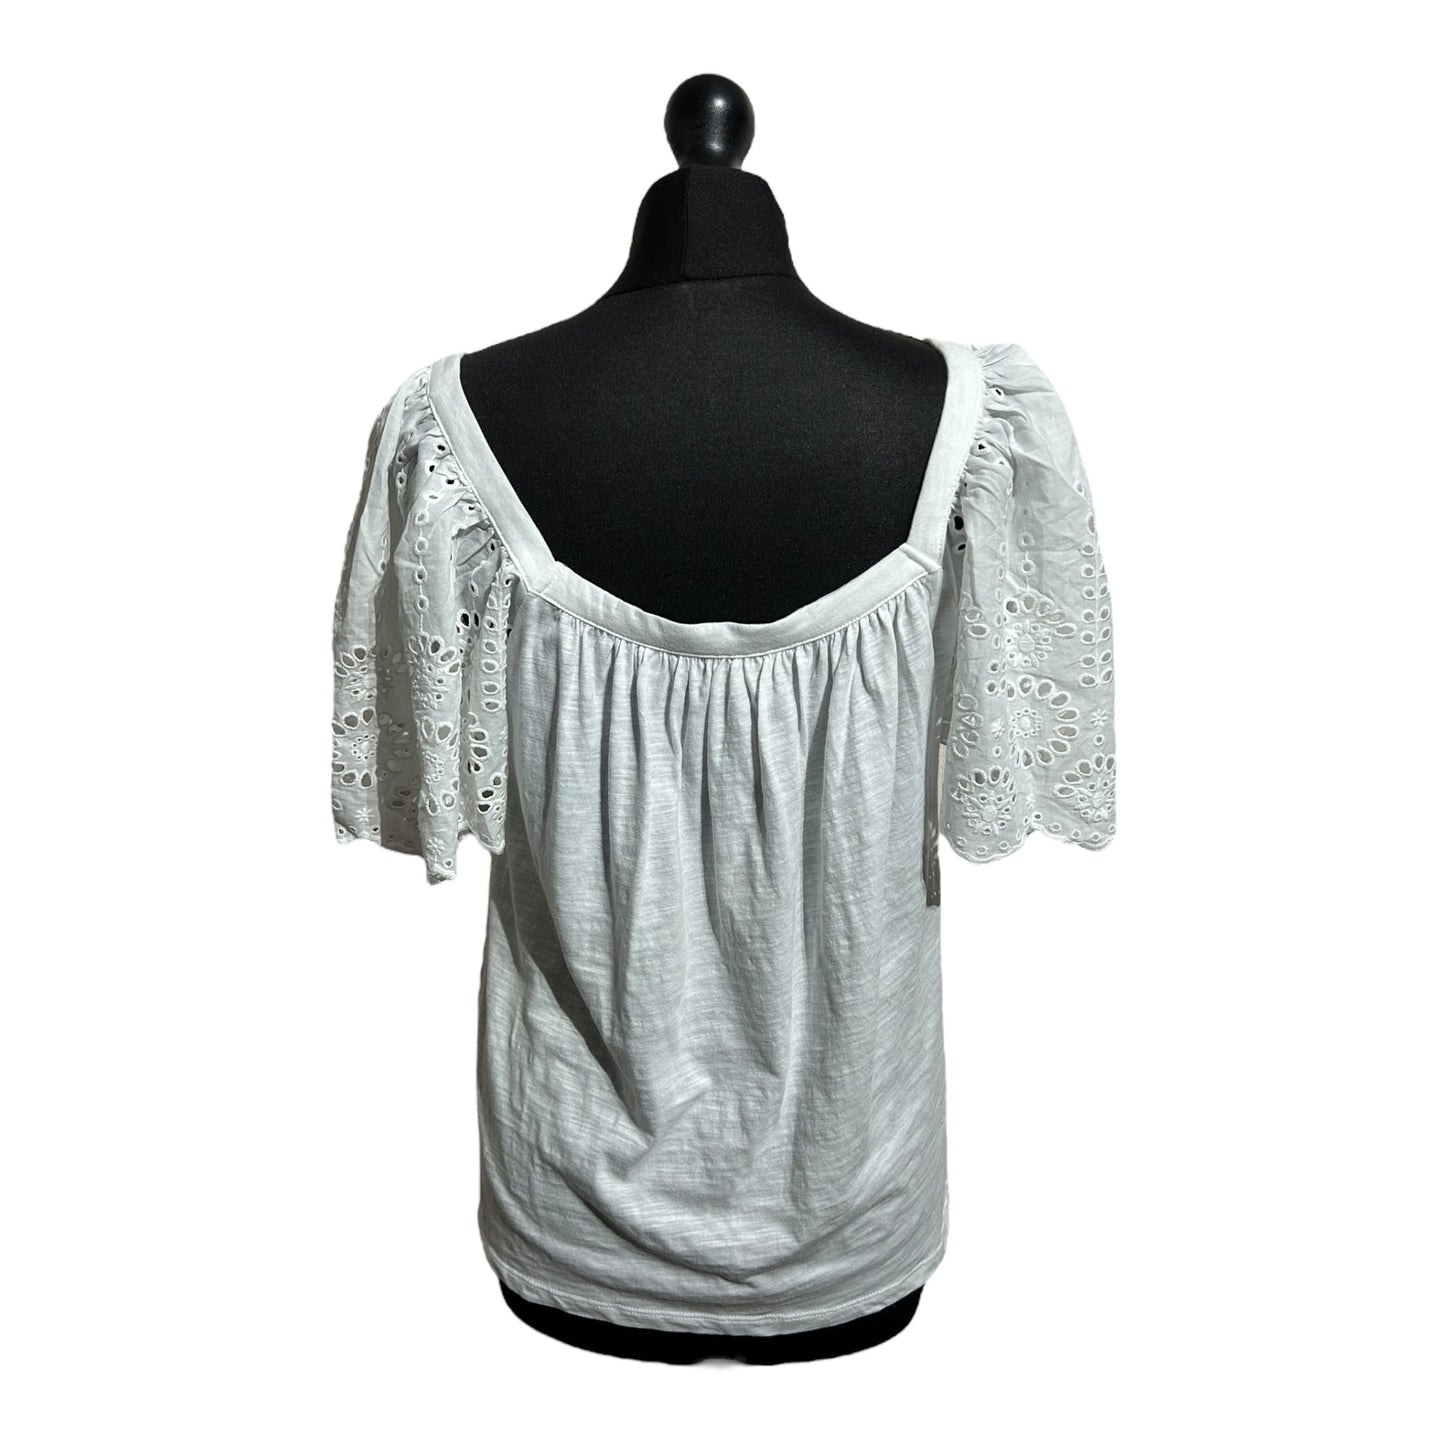 Boden Square Neck Woven Mix Top - Recurring.Life